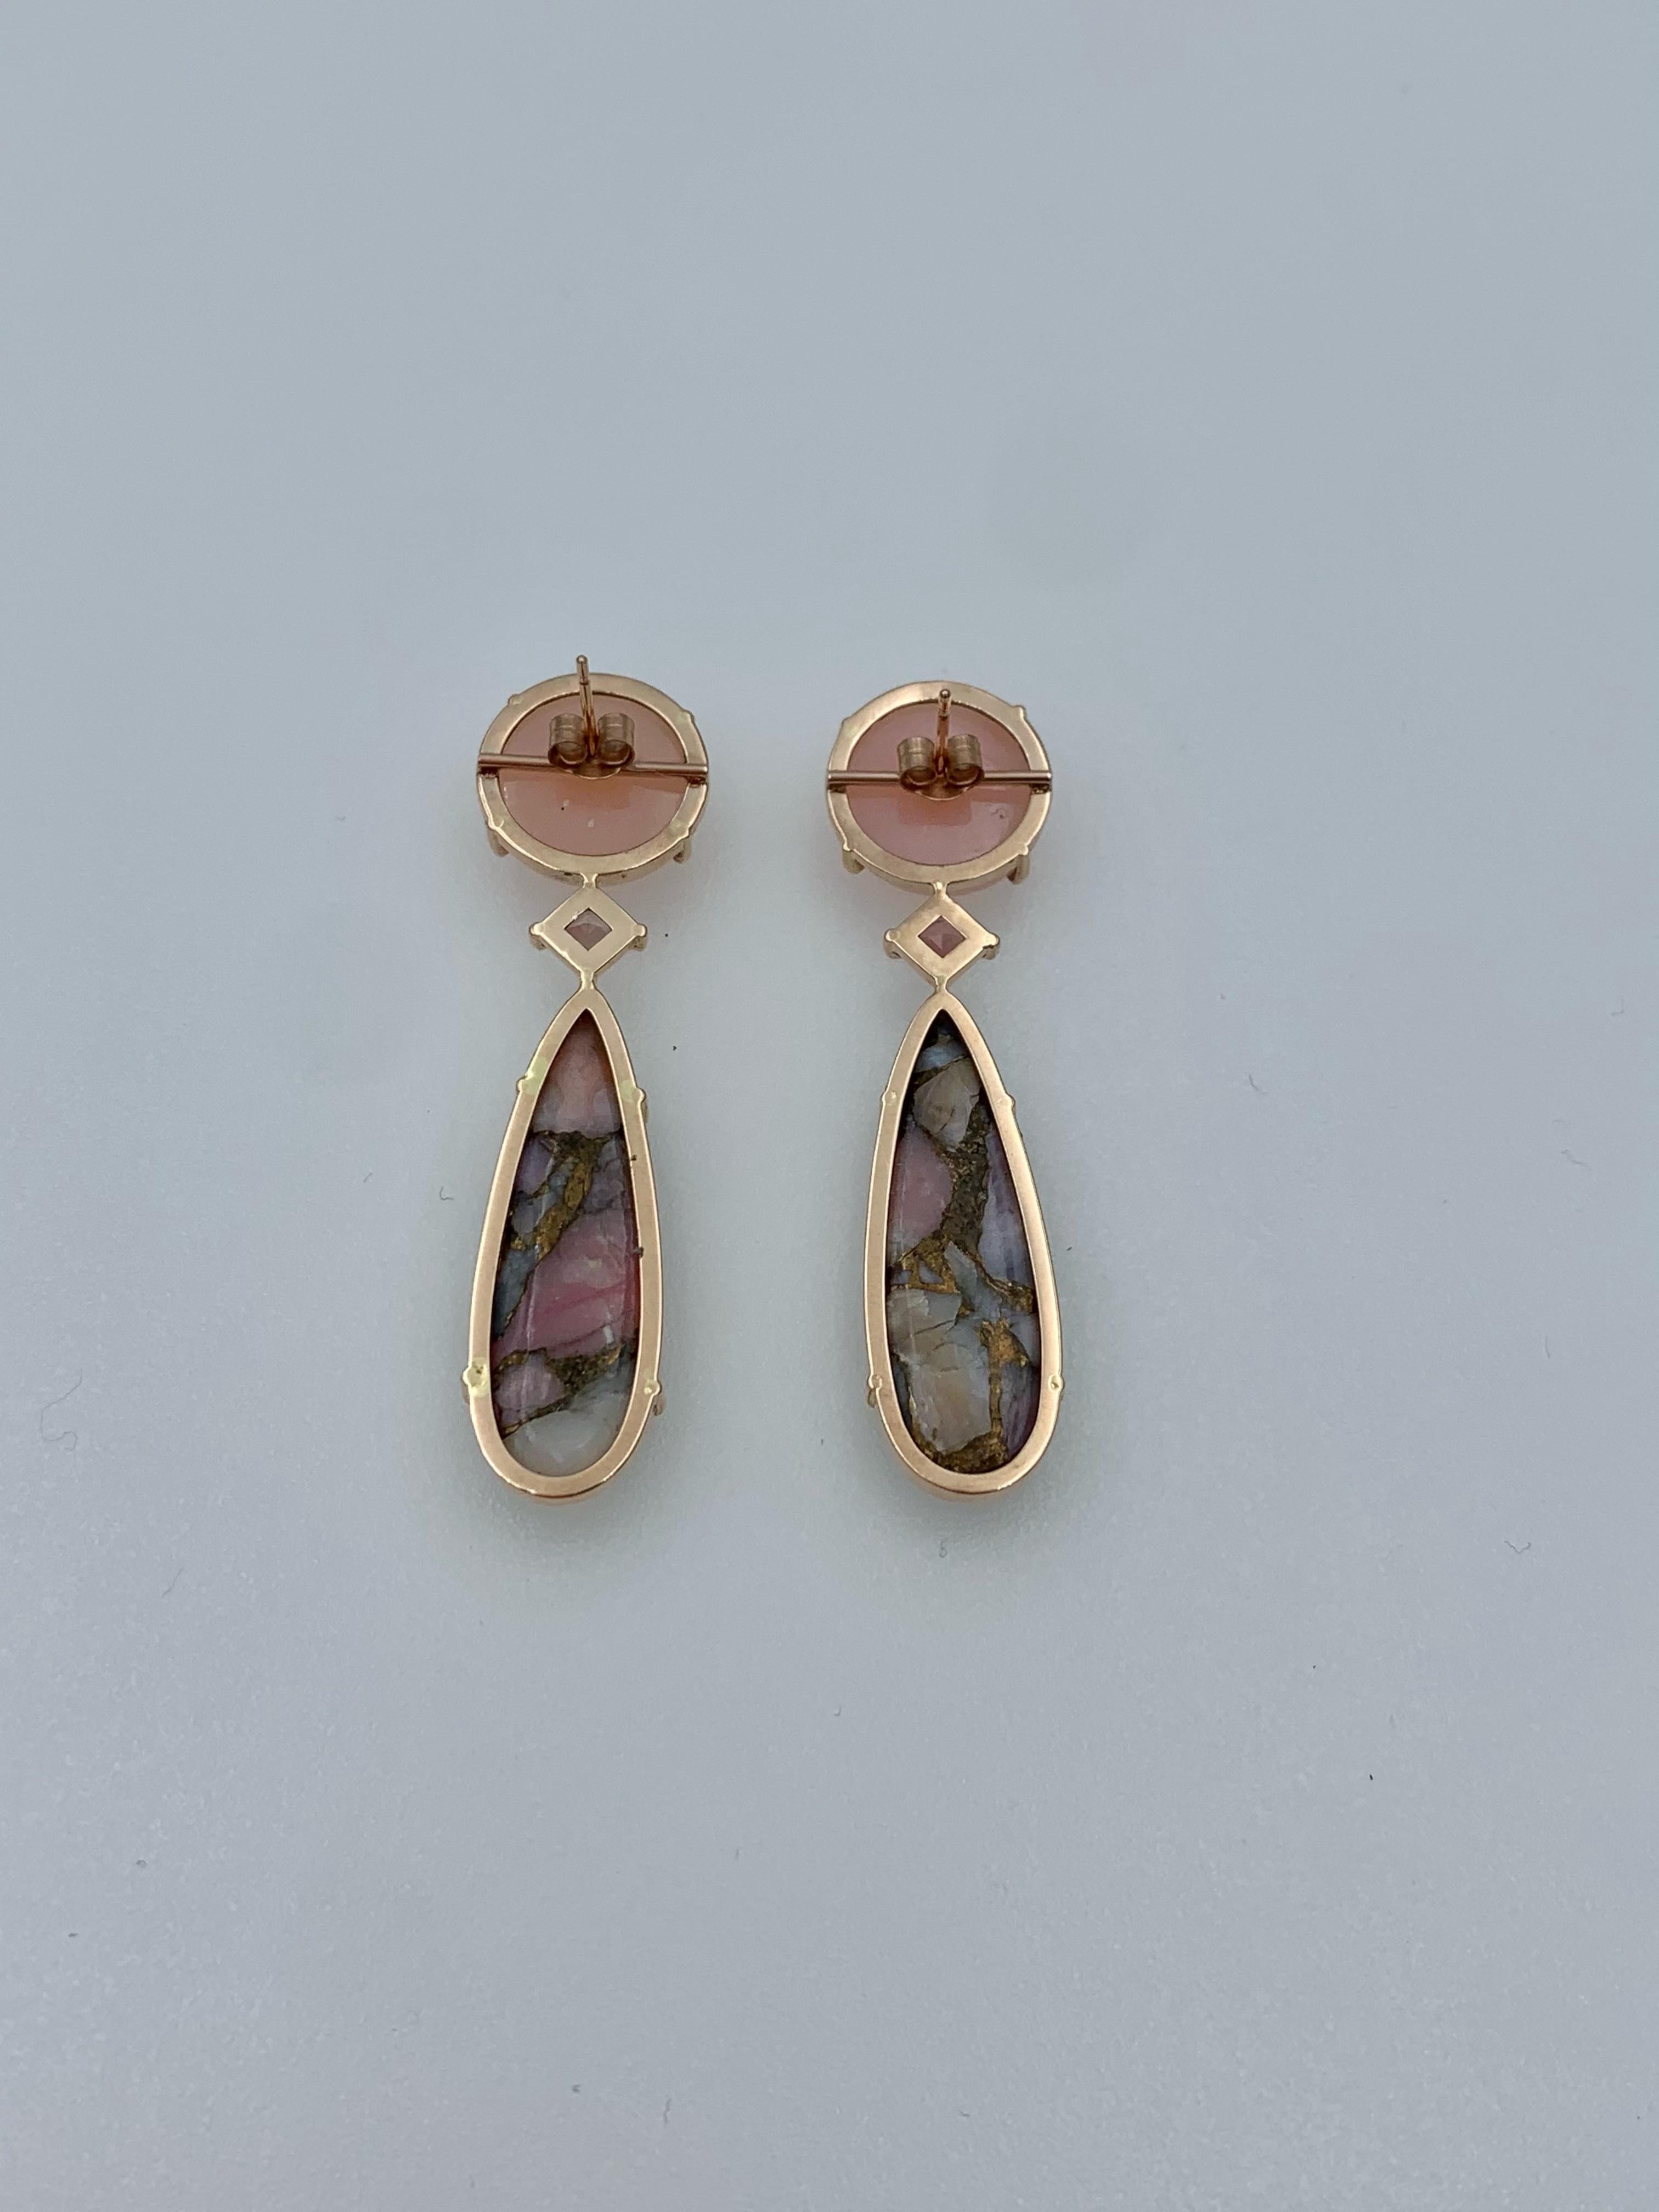 Handmade in 9 karat rose gold, these drop earrings have a Peruvian pink Opal cabochon, a princess cut Tourmaline and a long pear Copper Opal cabochon. Ideal for any party but can also spruce up your casual look. Though long, lightweight and easy to